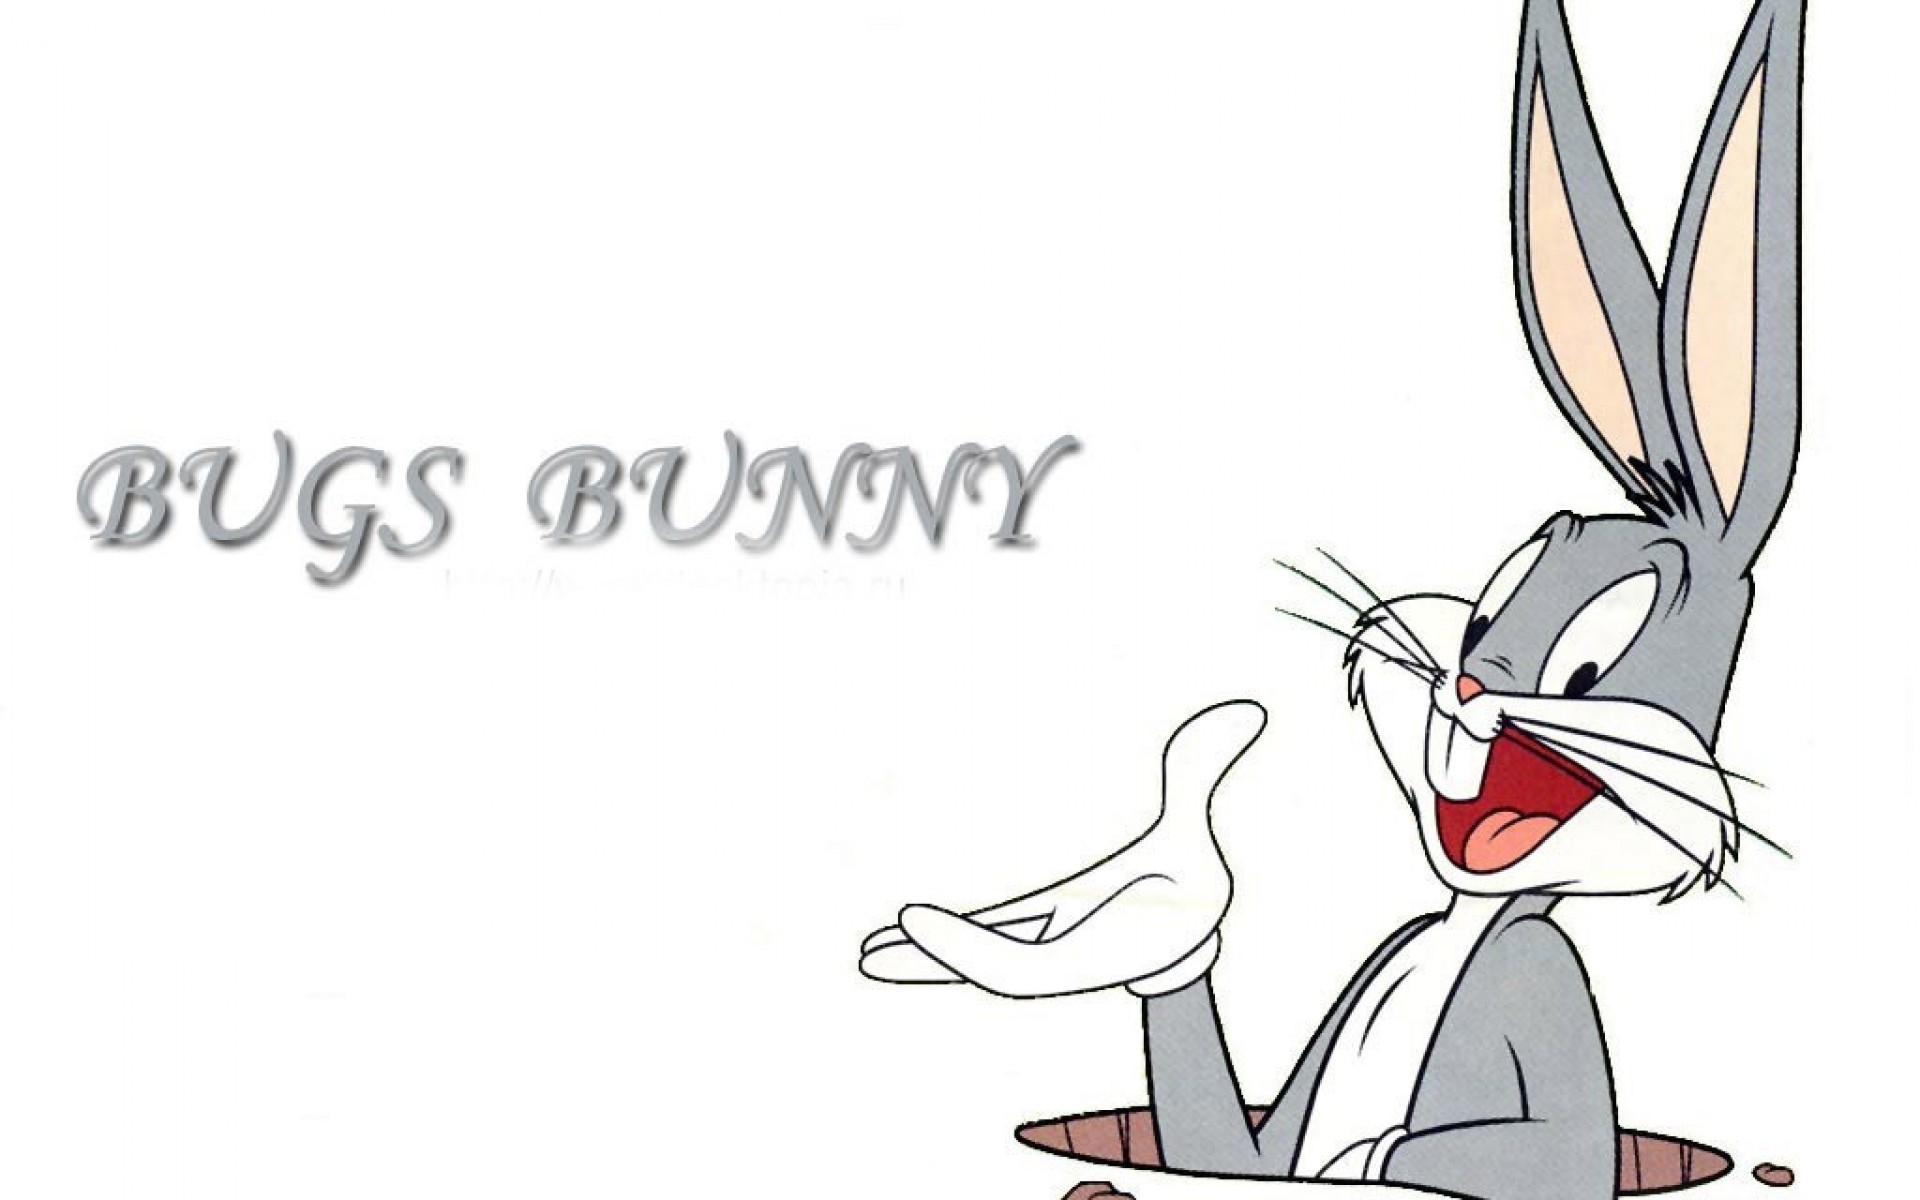 1920x1200 Wide HD Bugs Bunny Wallpaper | AHDzBooK Backgrounds HD Quality